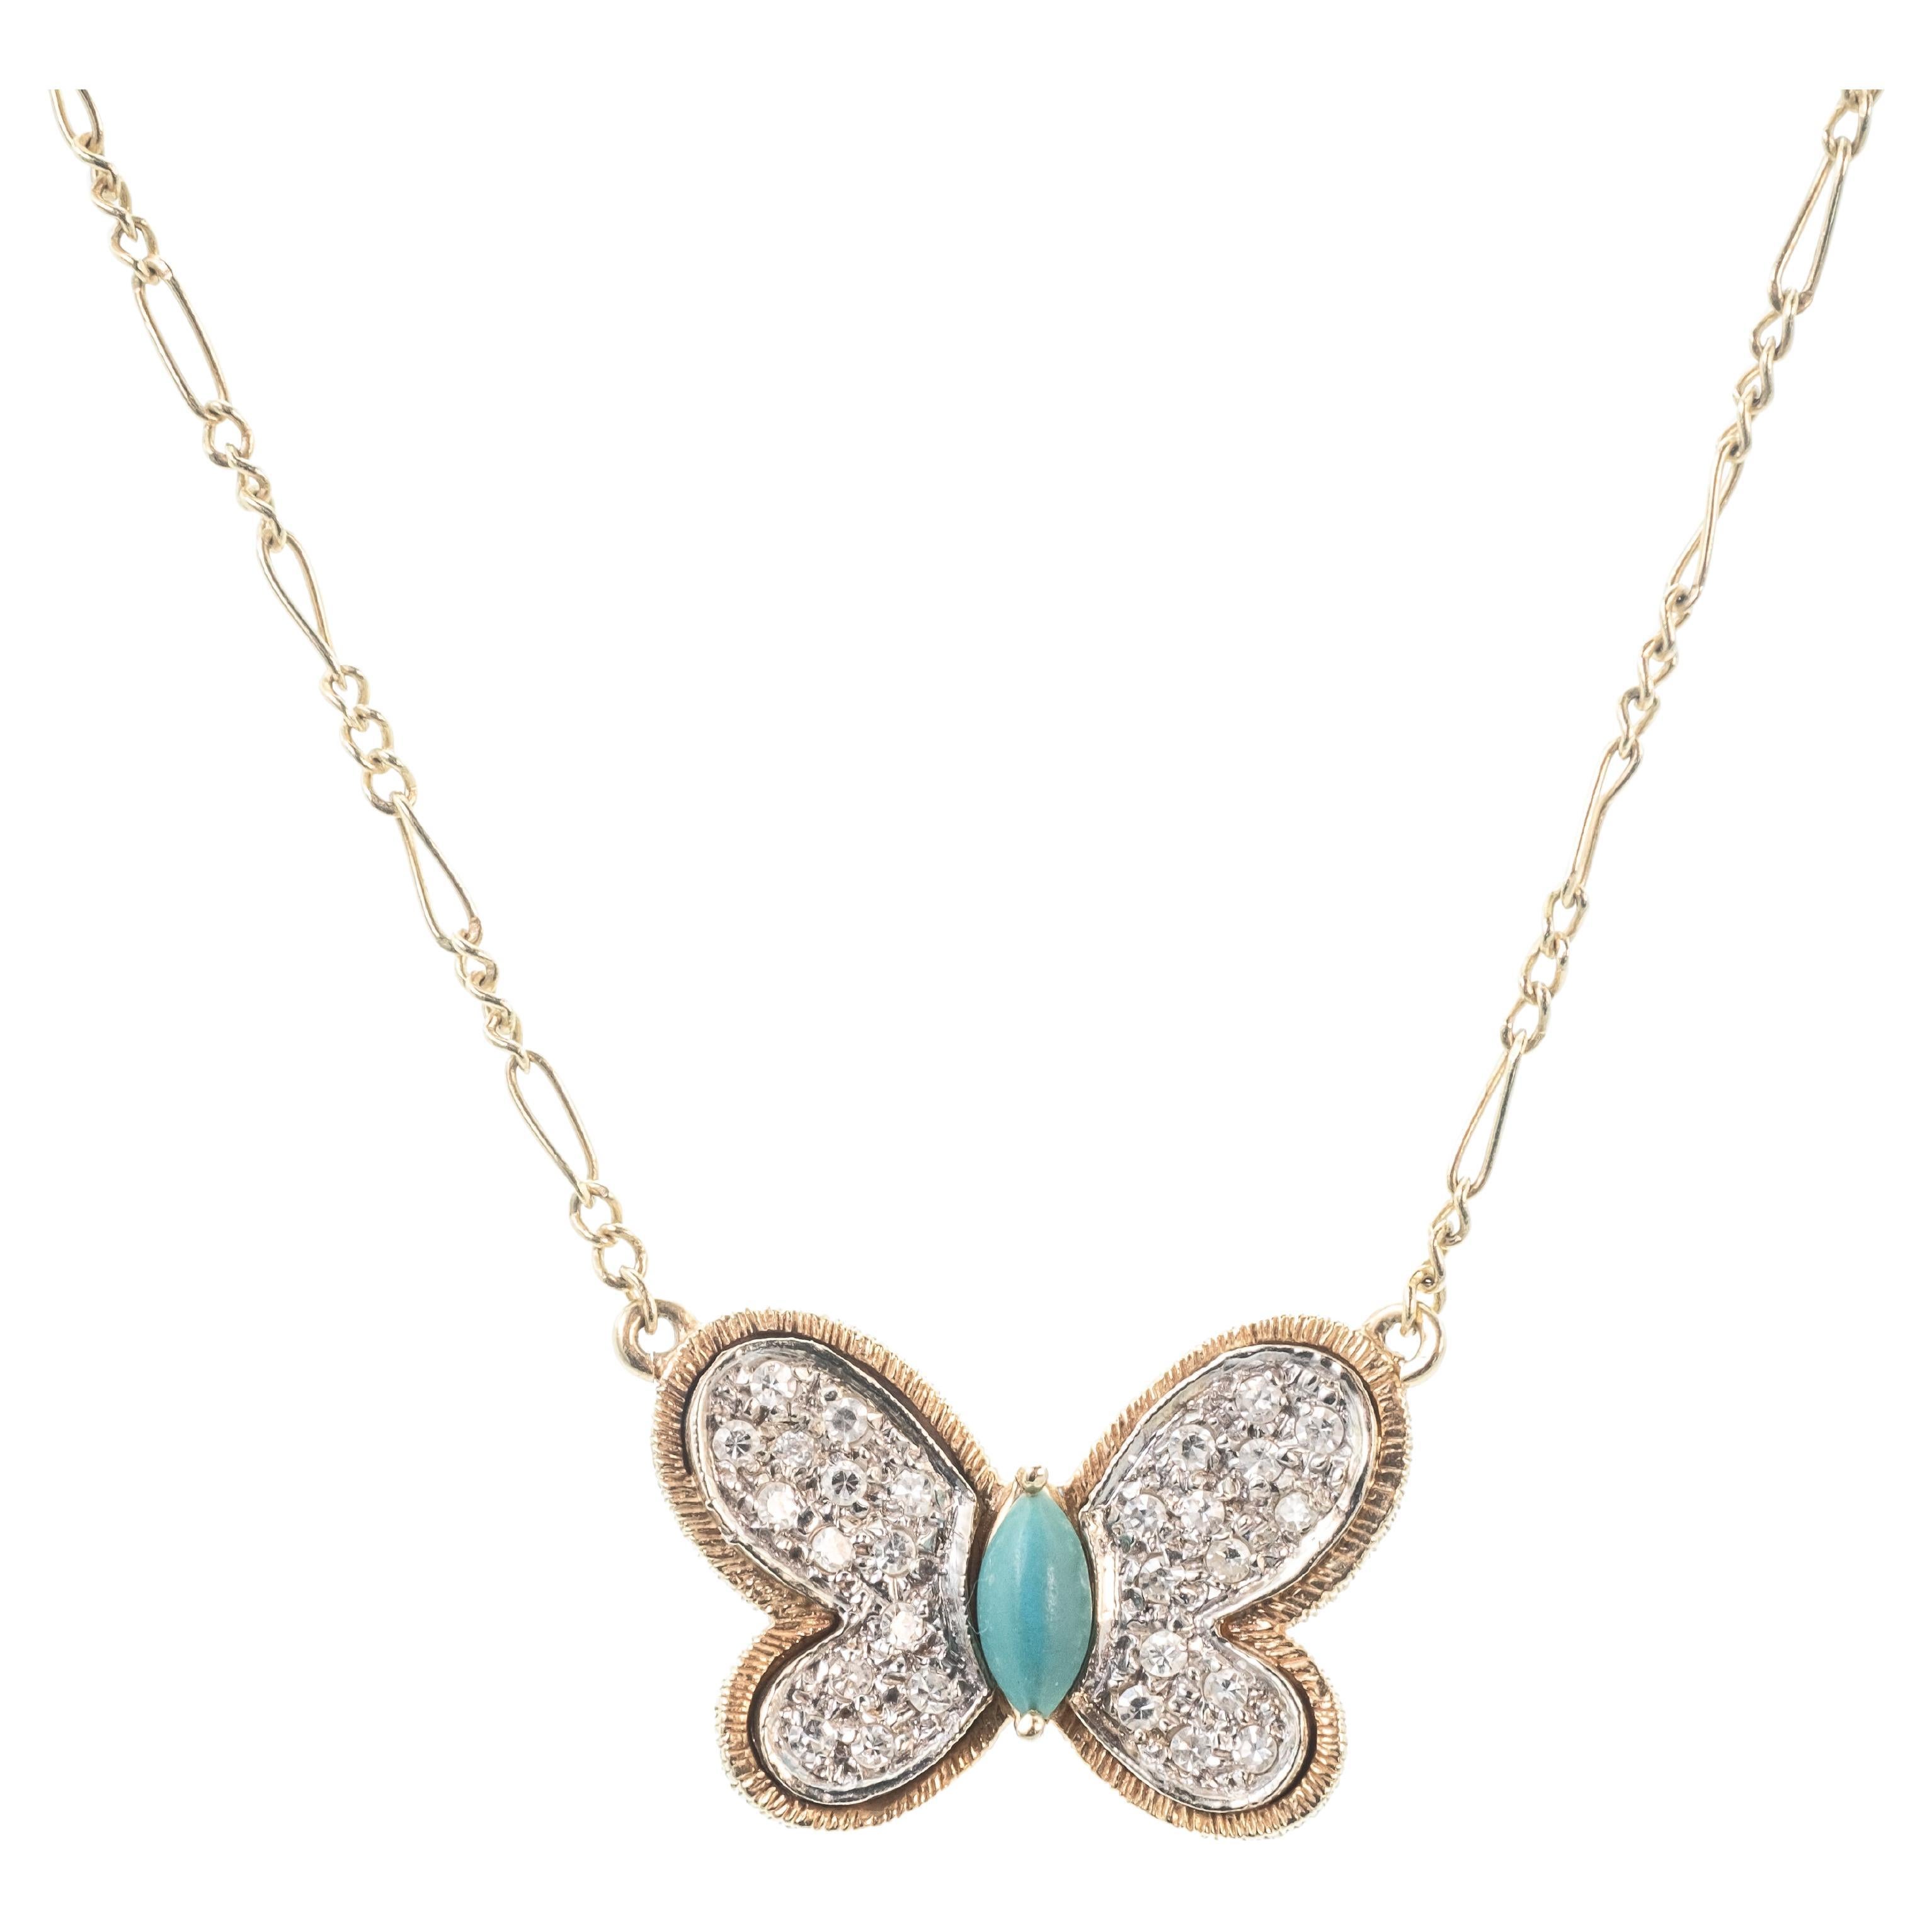 Presenting a vintage Hammerman Brothers butterfly necklace – a true testament to the legacy of the Hammerman Brothers' fine craftsmanship. Set in 14 karat yellow gold, this elegant pendant showcases a delicate butterfly motif. Each wing is adorned